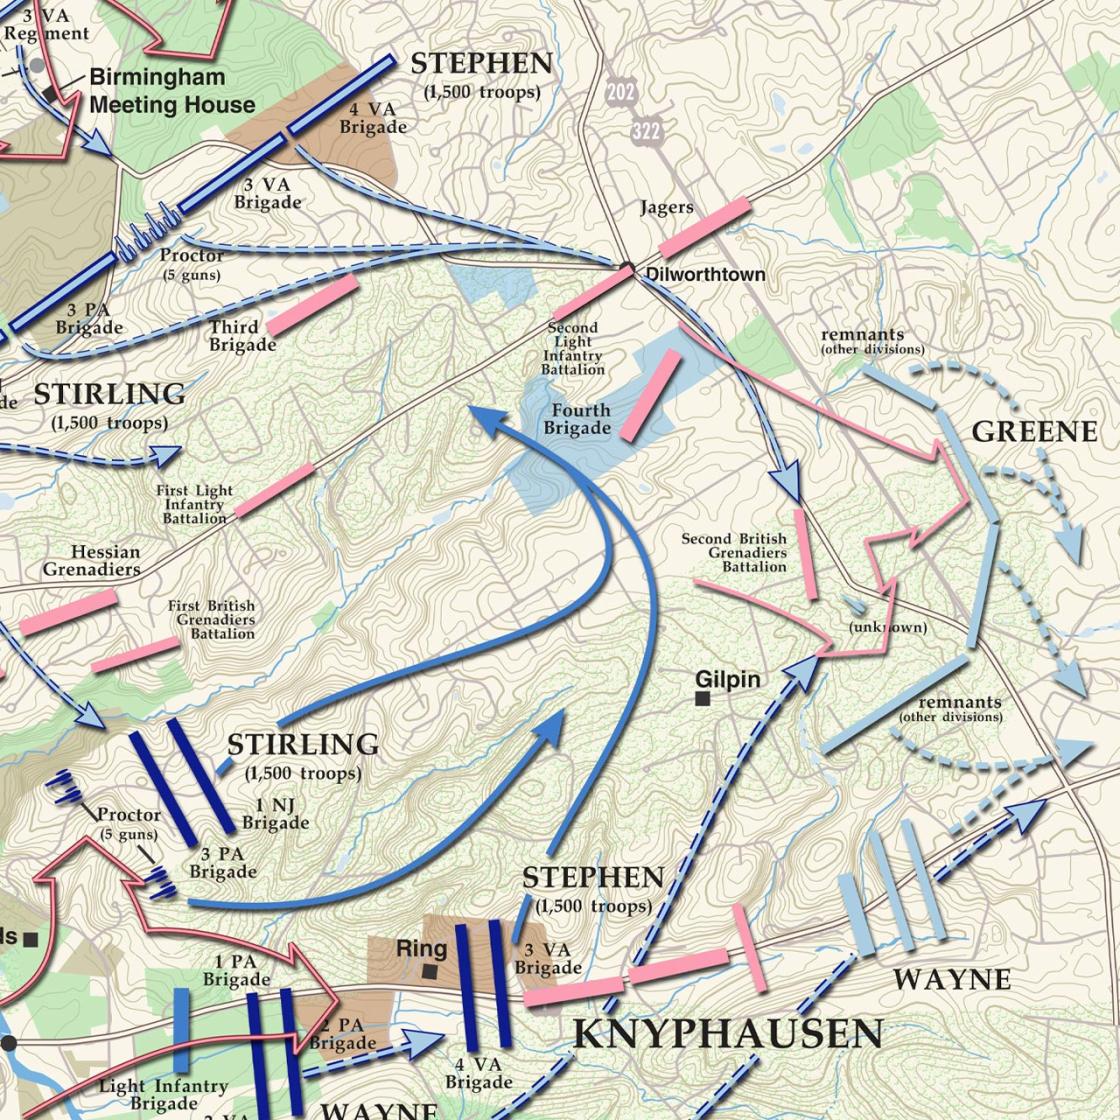 A detail of the Battle Map for the Battle of Brandywine showing land saved by the Trust and its patners